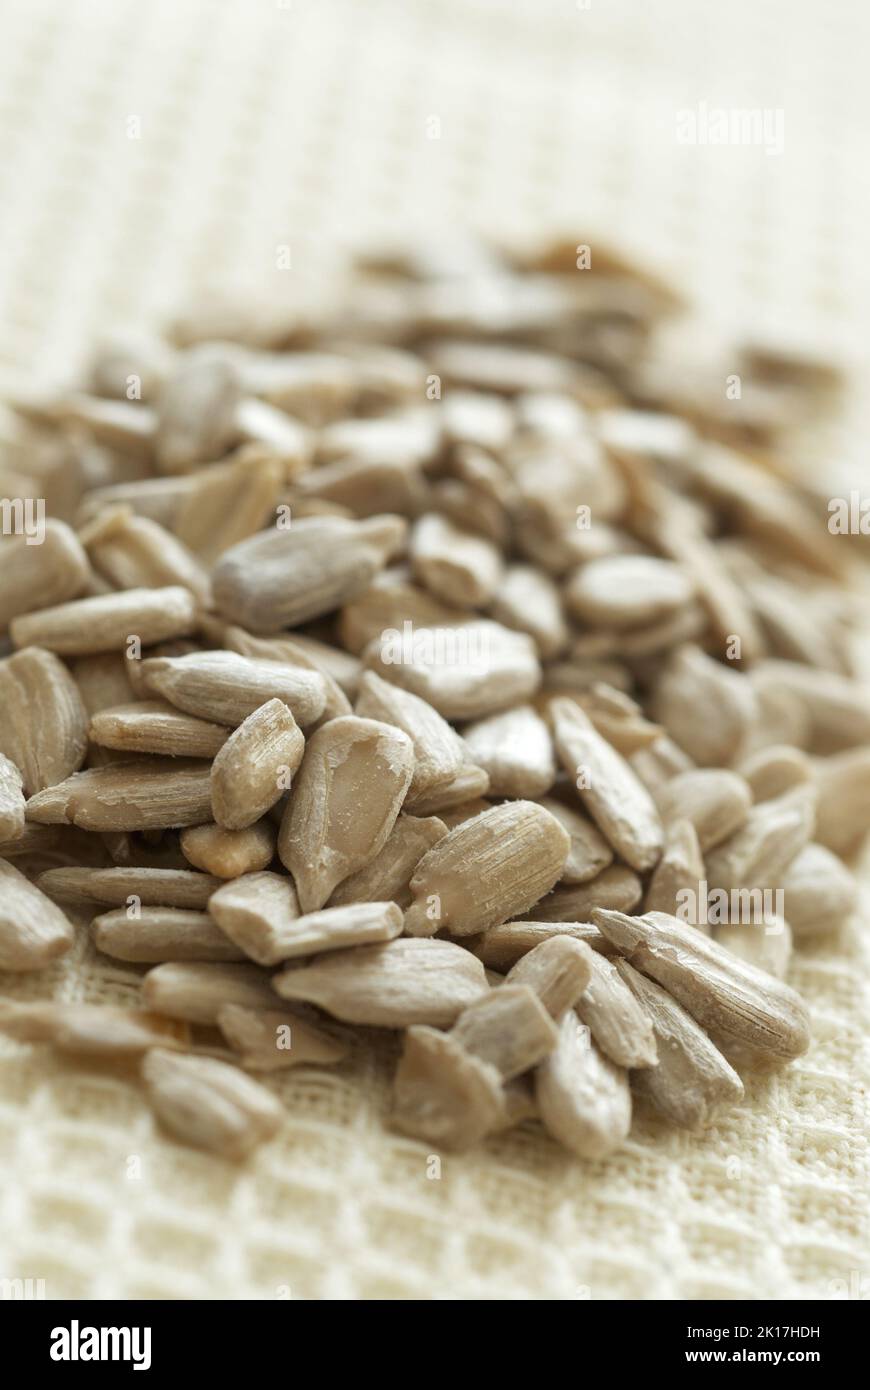 A pile of sunflower seeds close up Stock Photo